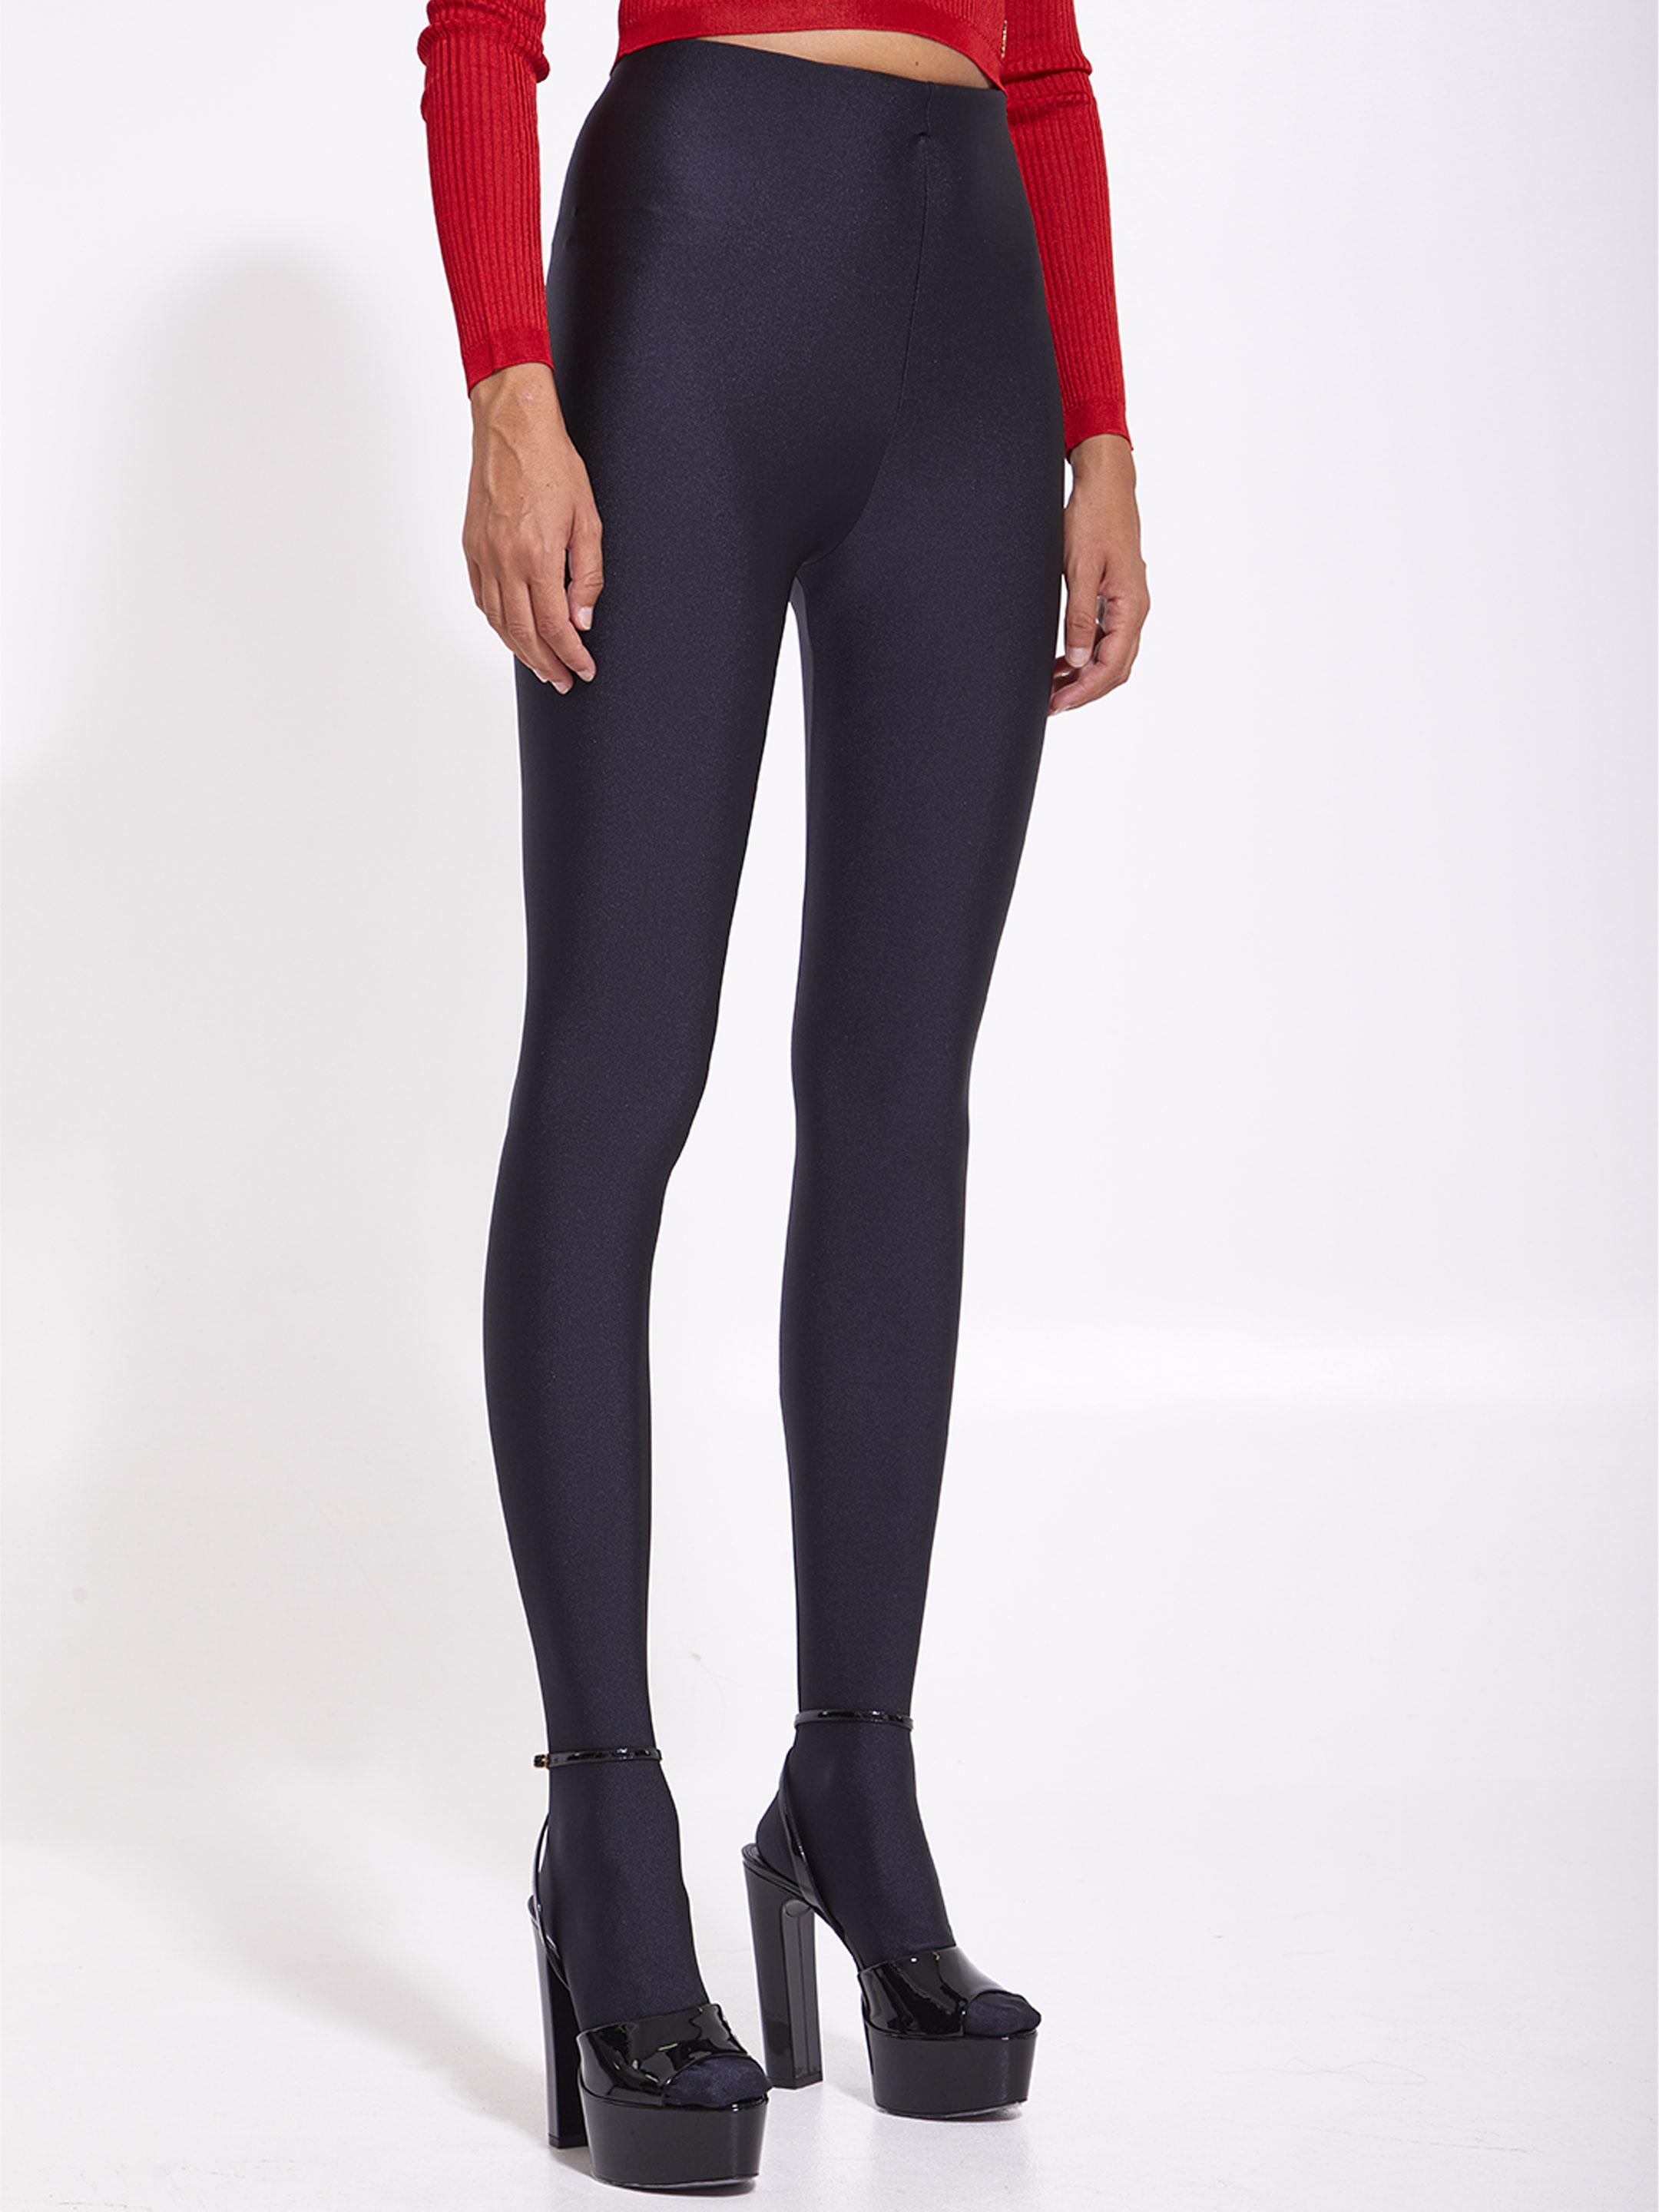 Saint Laurent Tights In Shiny Jersey in Black | Lyst